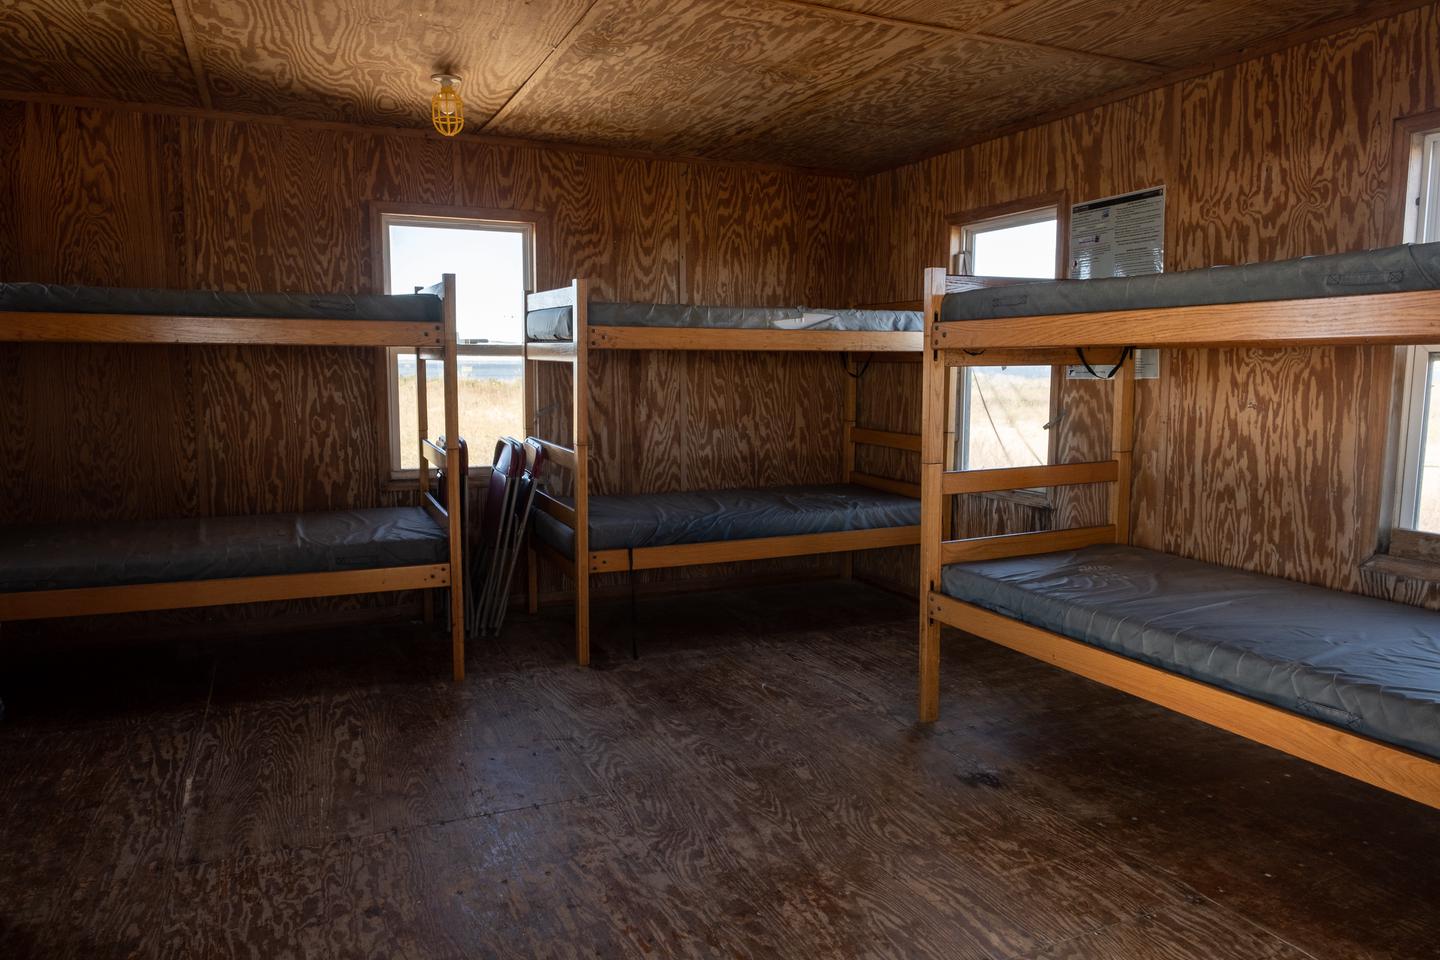 A view of the living room / bedroom area showing 3 bunk beds.Living room/bedroom with 3 bunk beds.